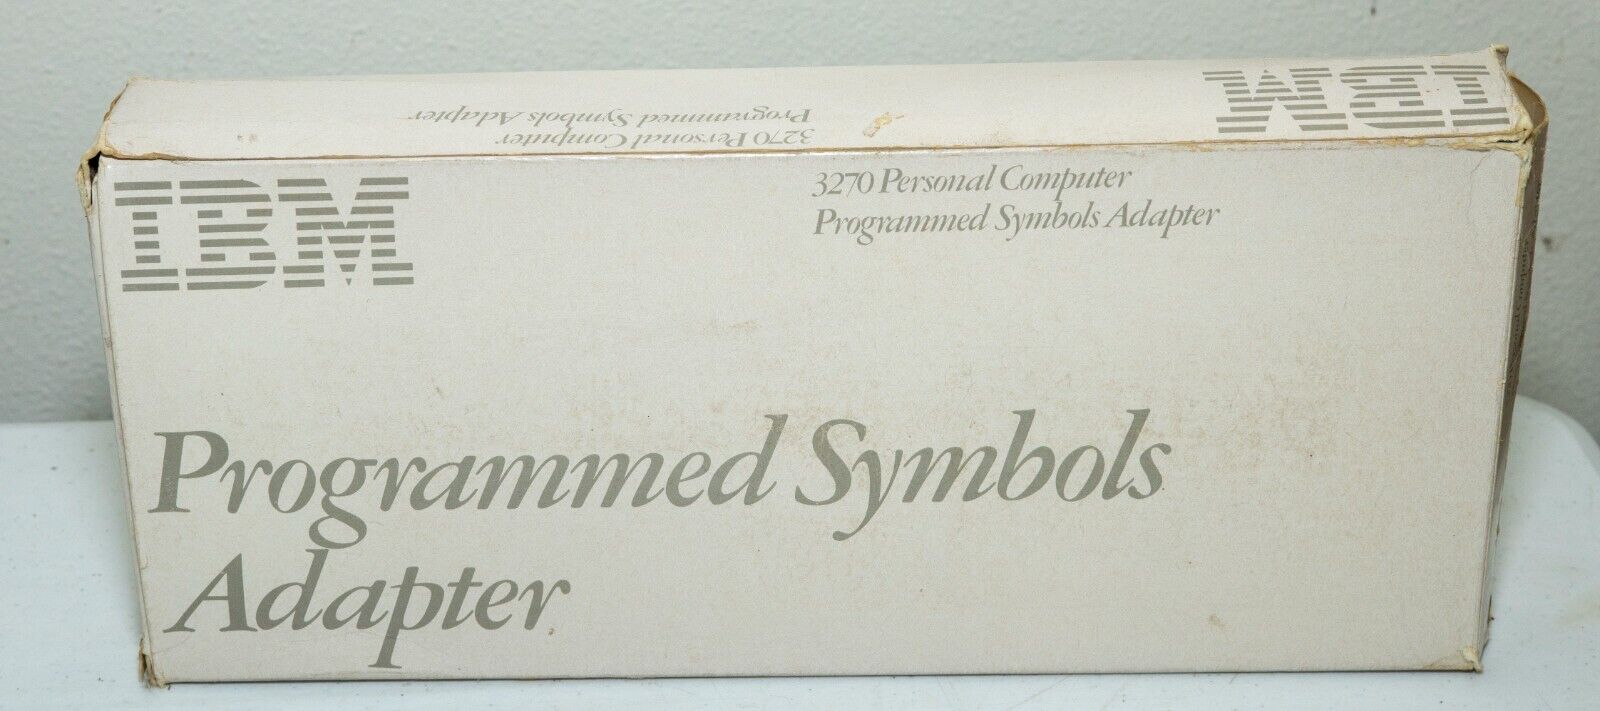 Vintage IBM 3270 Personal Computer PC XT Programmed Symbols Adapter new in box